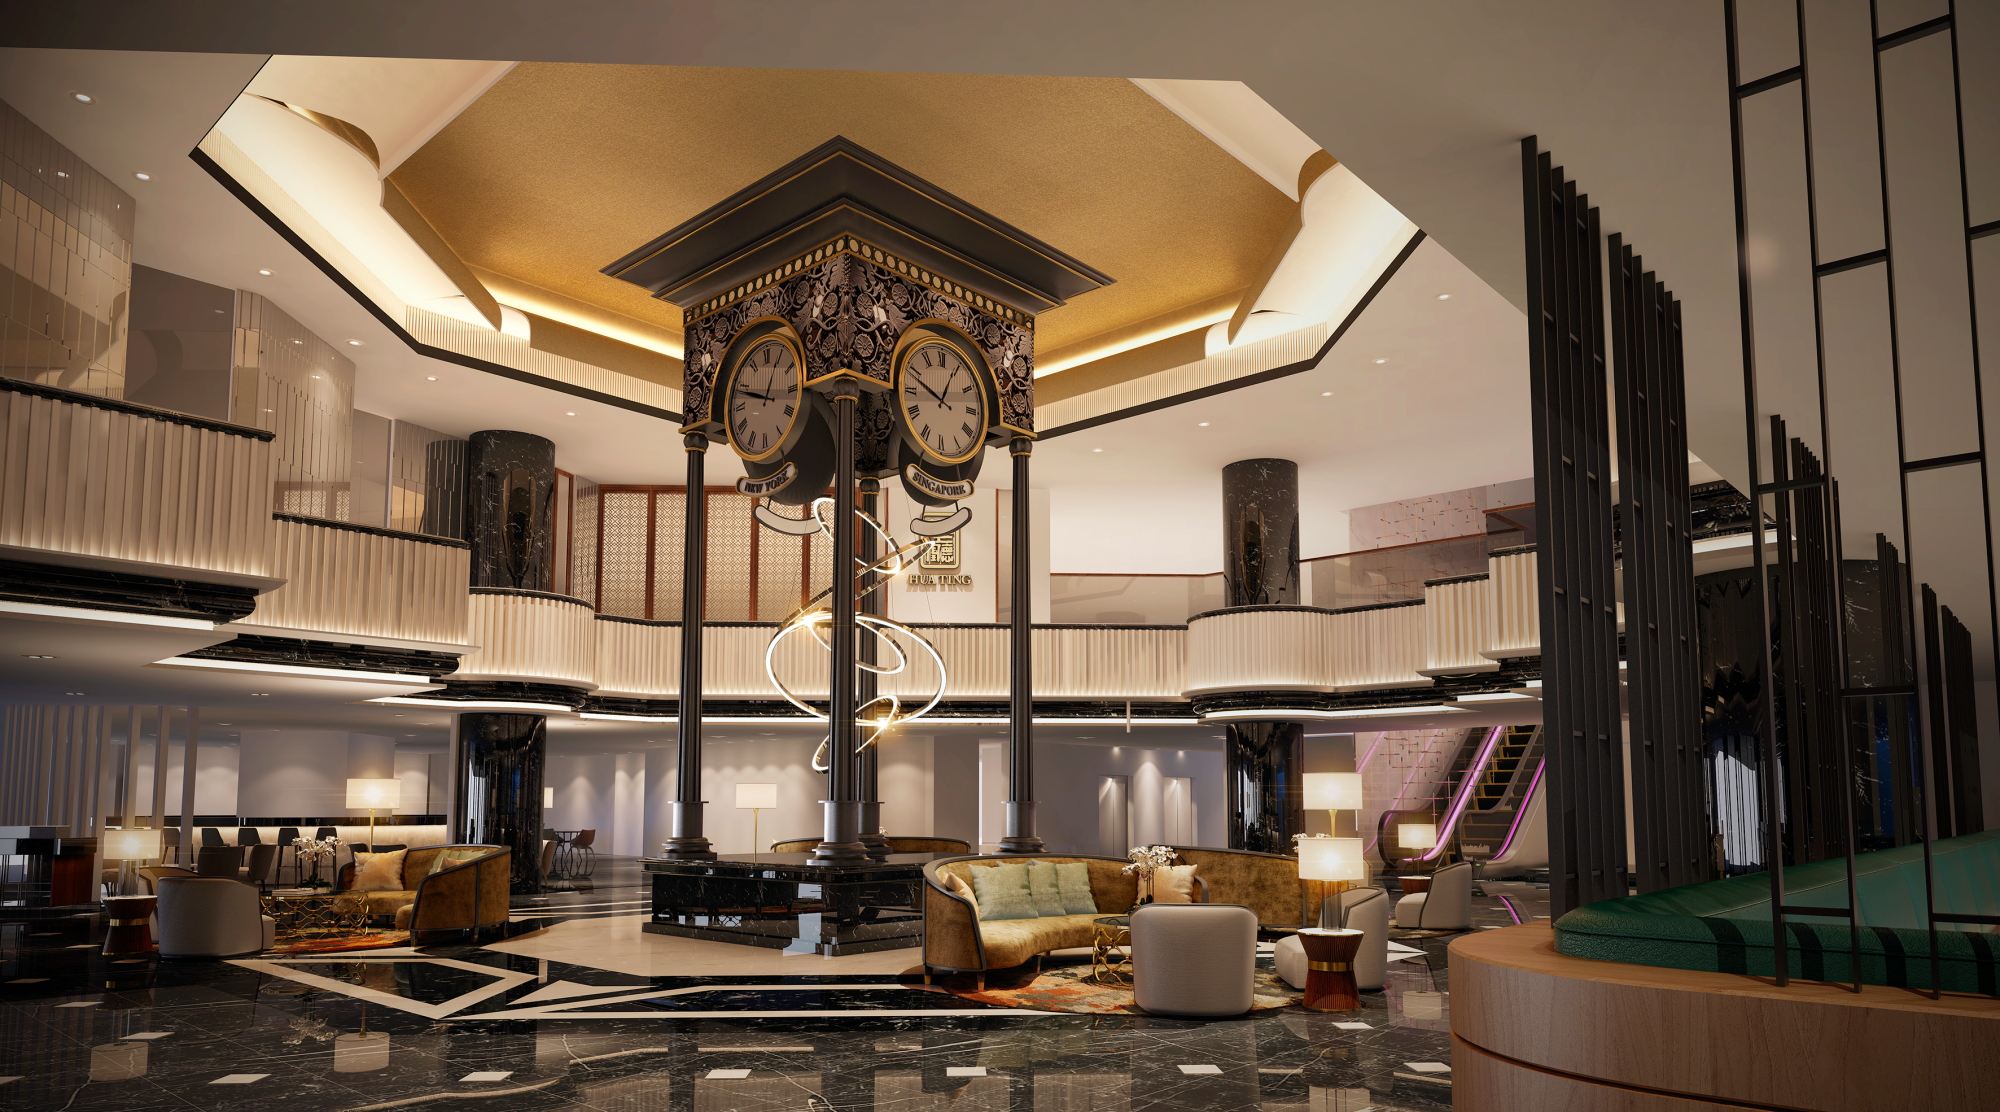 The refurbished lobby at Orchard Hotel Singapore may well look like this when it is completed. Click to enlarge.